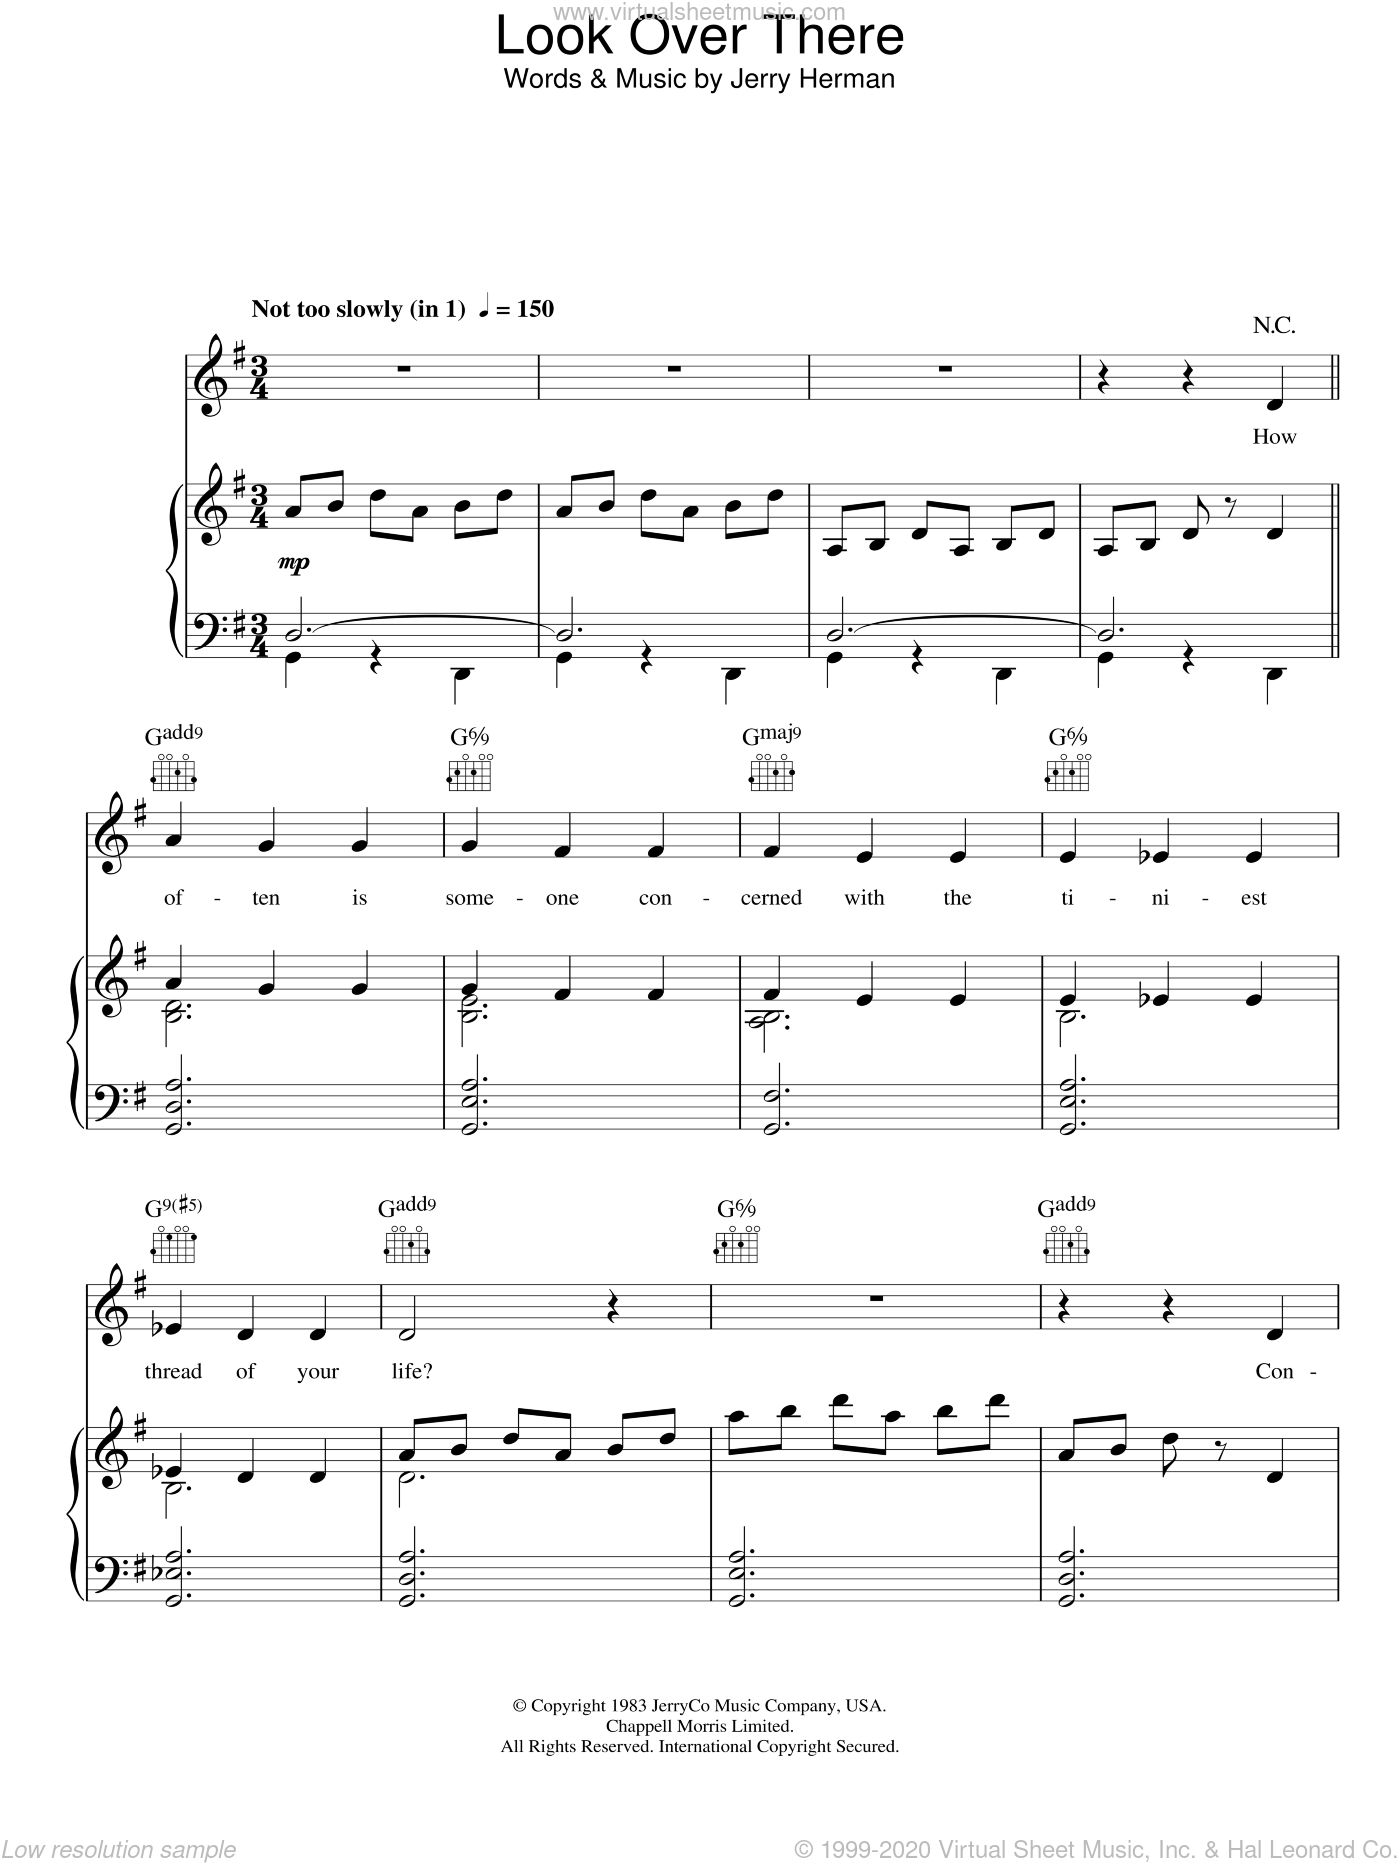 Everywhere You Look from 'Full House' Sheet Music in E Major  (transposable) - Download & Print - SKU: MN0143700